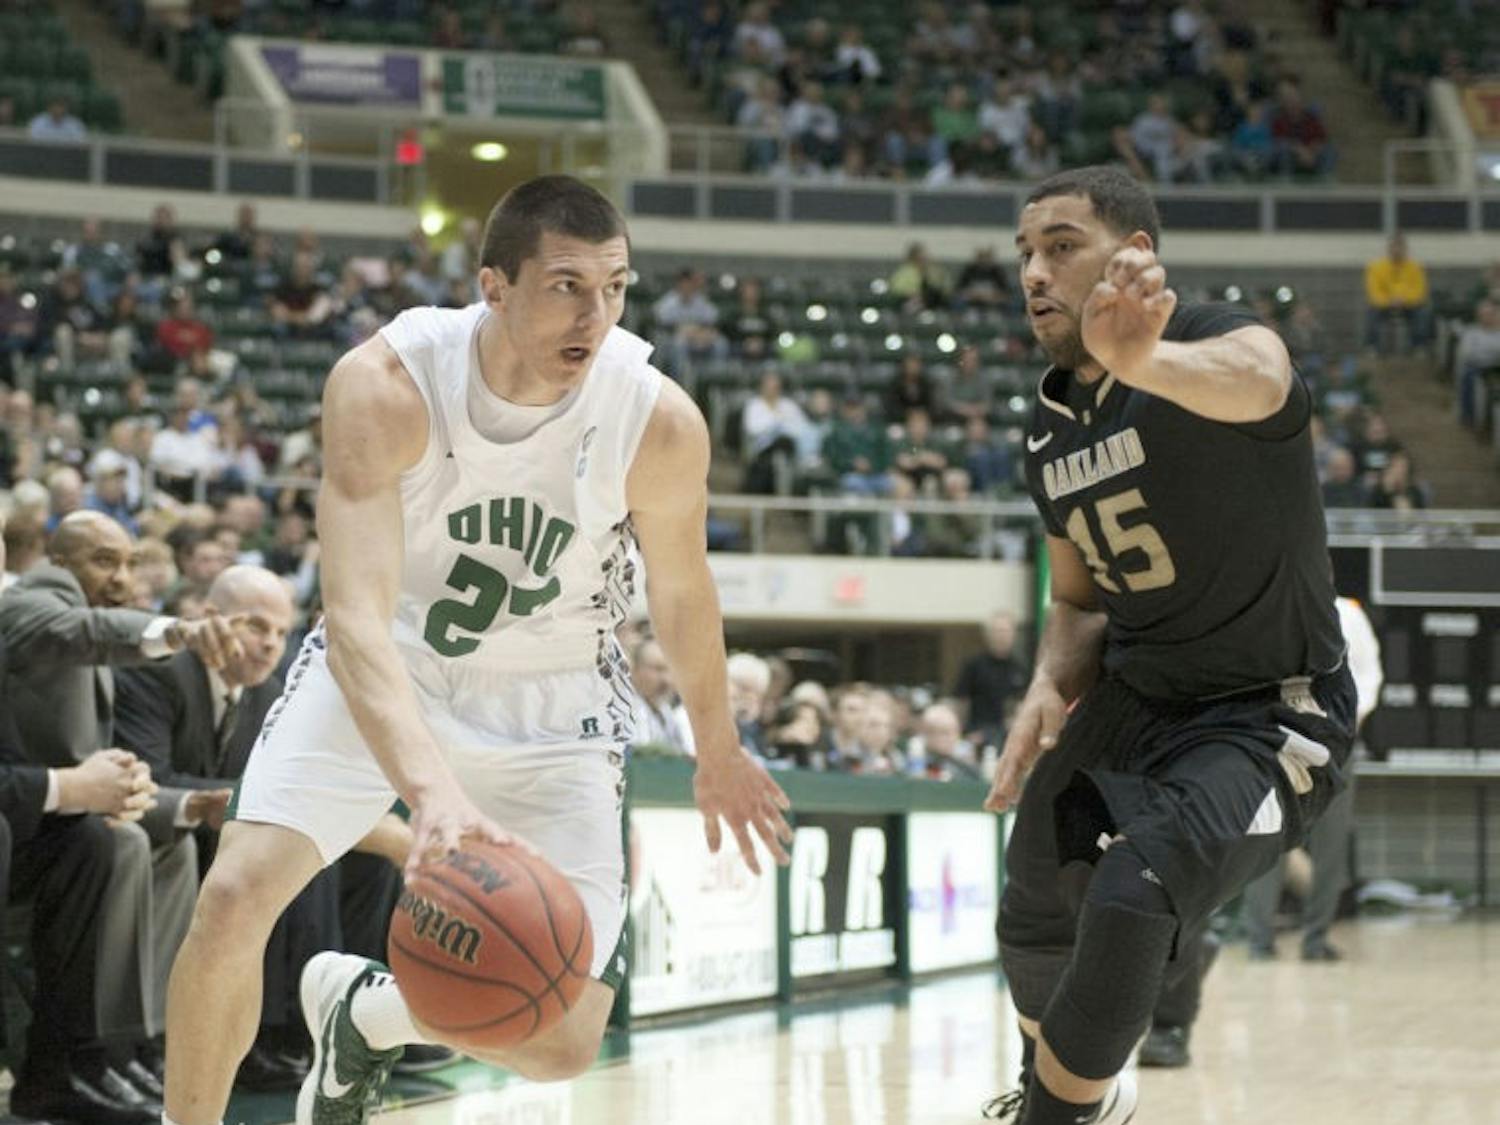 Basketball Notebook: Ohio falls to UMass in third straight road game  